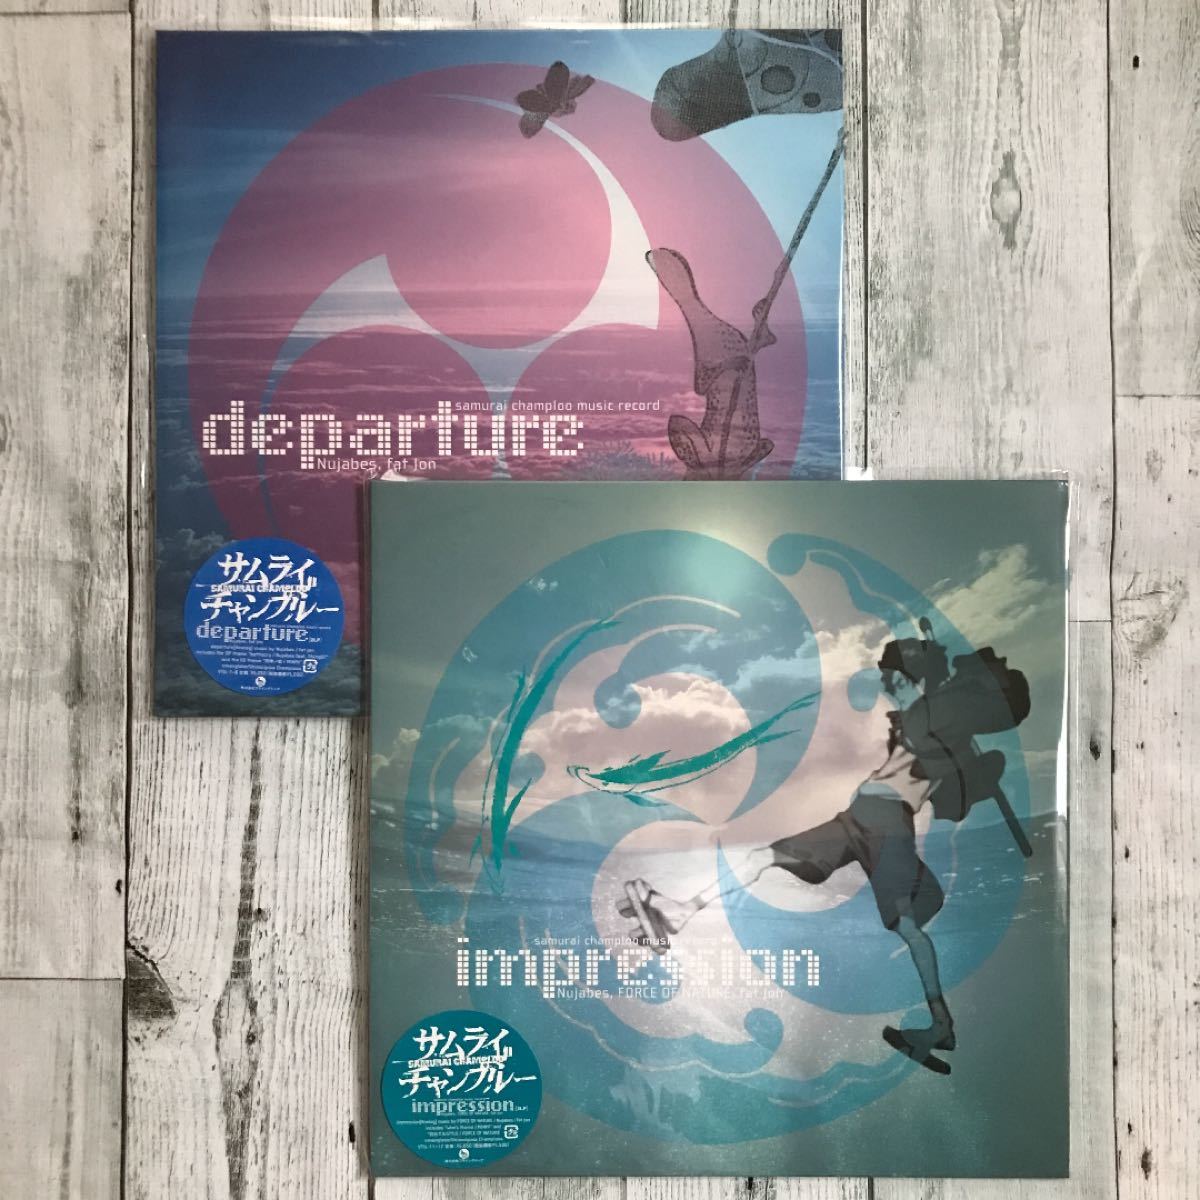 PayPayフリマ｜【未使用 限定LPセット】 正規再発盤 Samurai Champloo departure/Impression/NUJABES